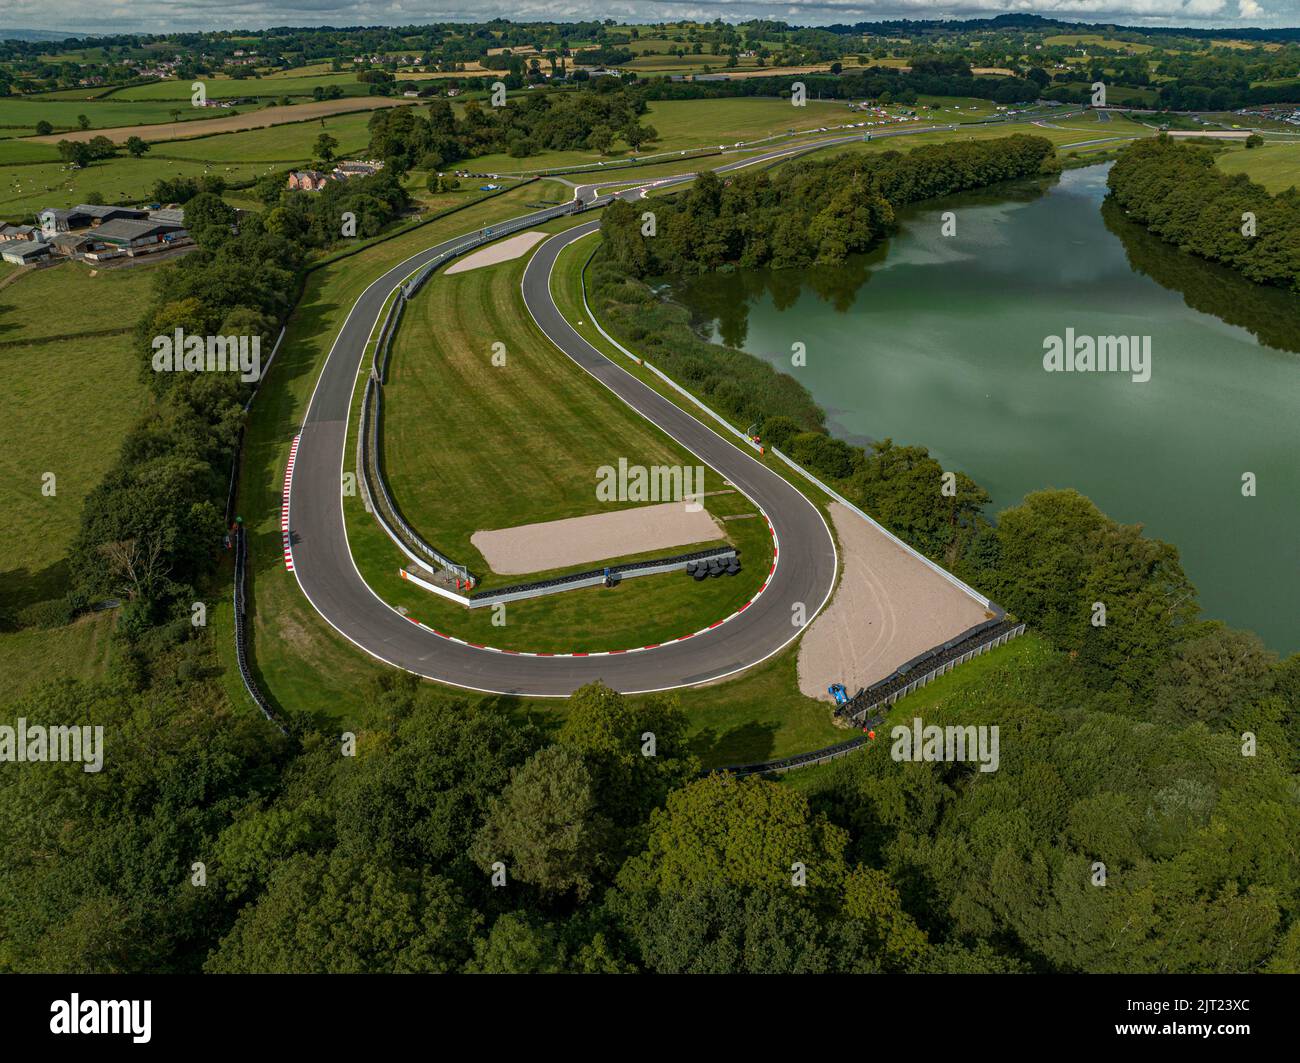 Aerial Photos of Oulton Park Raceay Cheshire during the Us USA Autoshow Auto Show Drone Birds Eye View From the Air Nascar Stock Photo